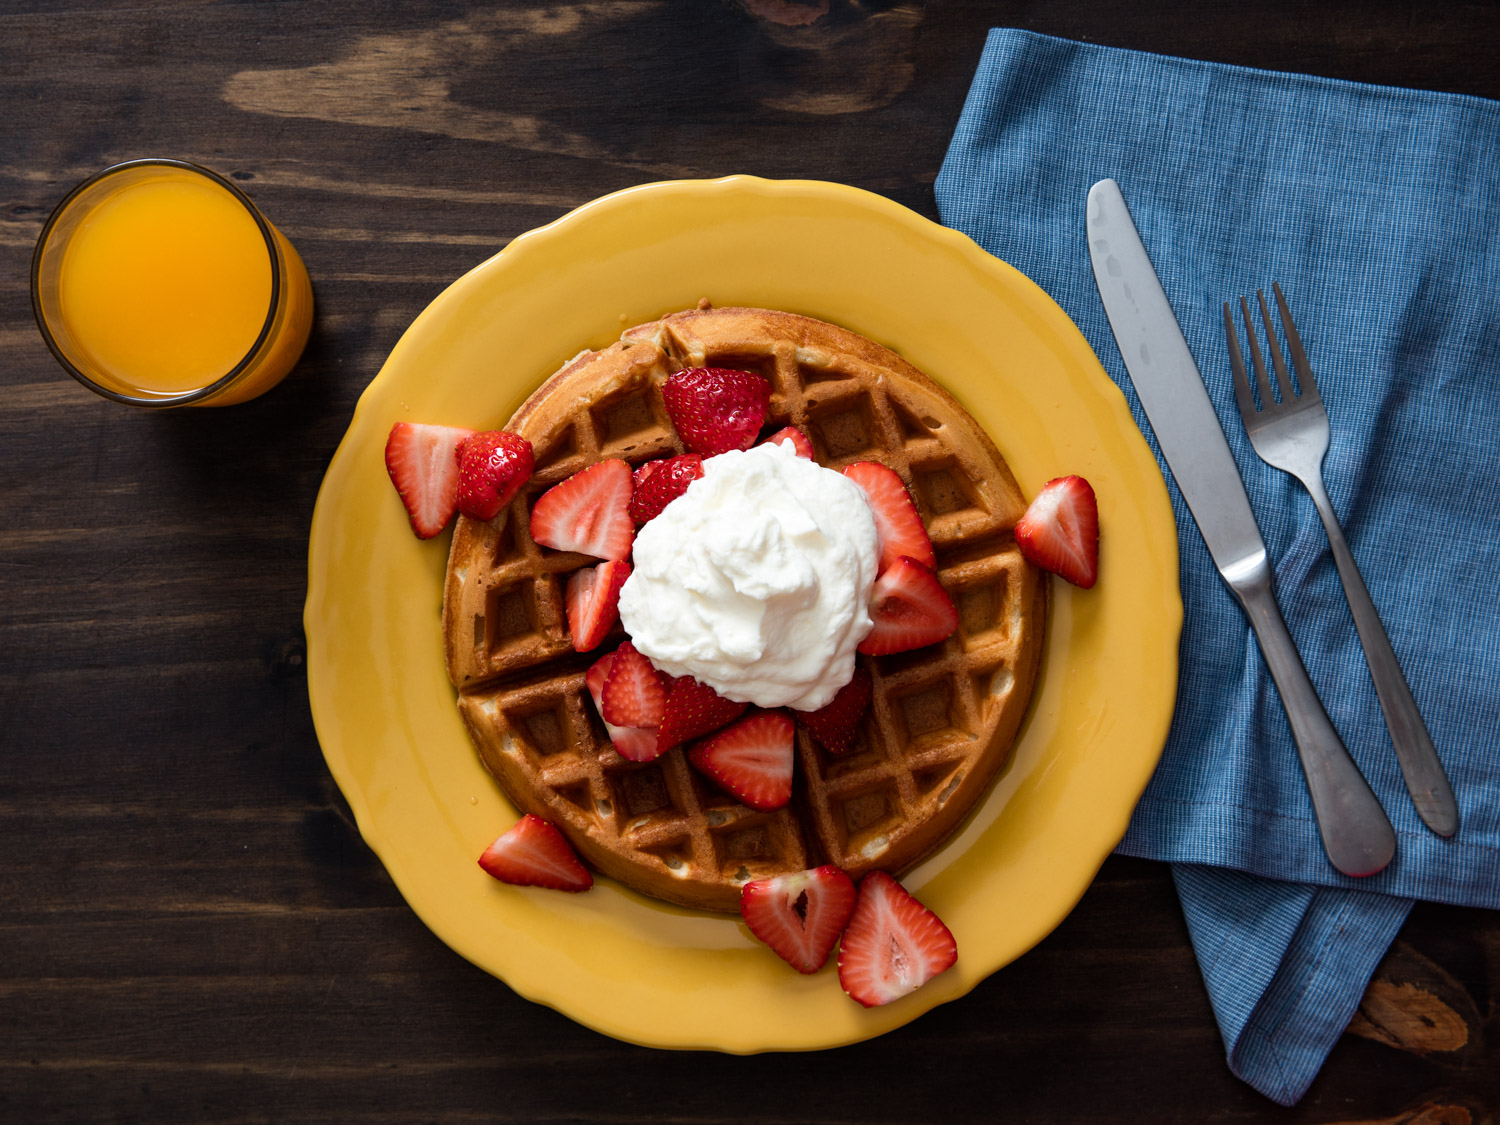 Pretend to Order an Expensive Brunch and We’ll Reveal Whether You’re More Millionaire or Billionaire Material Strawberry waffles